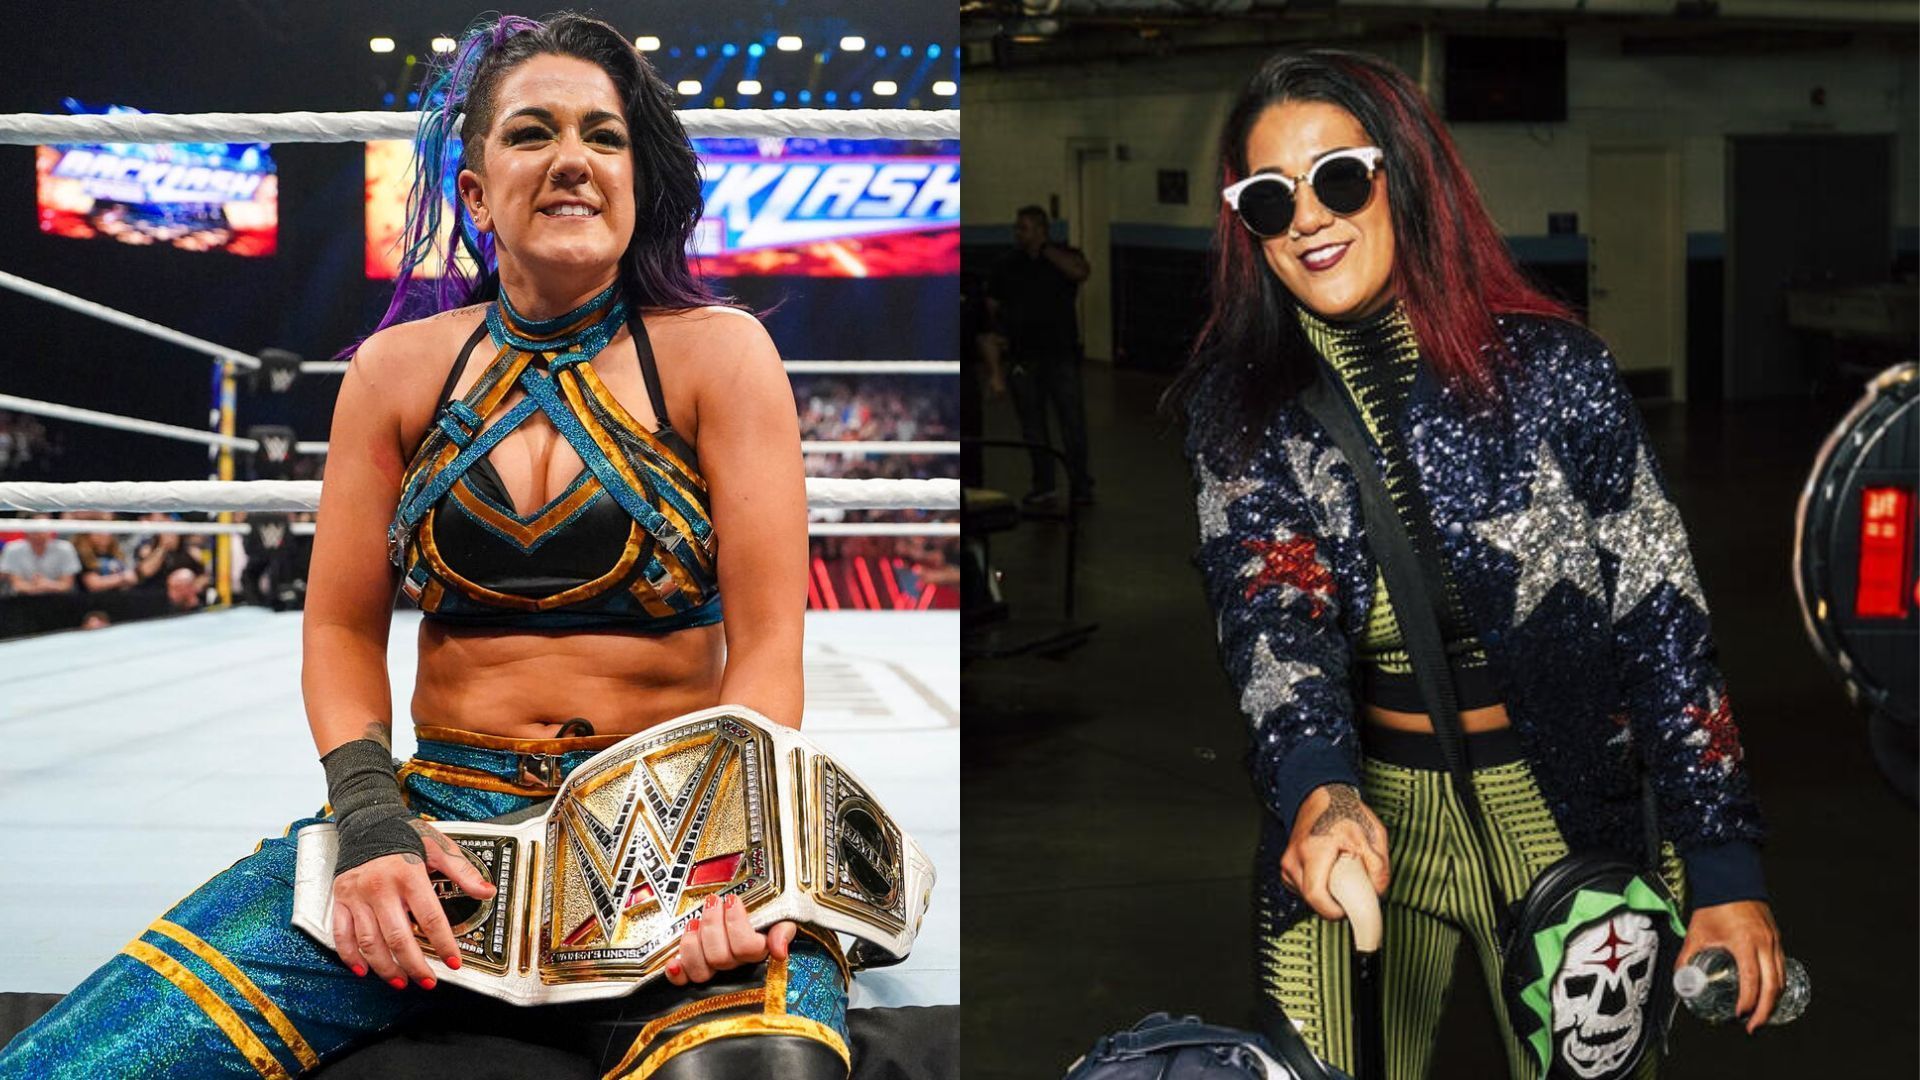 Bayley is the reigning WWE Women